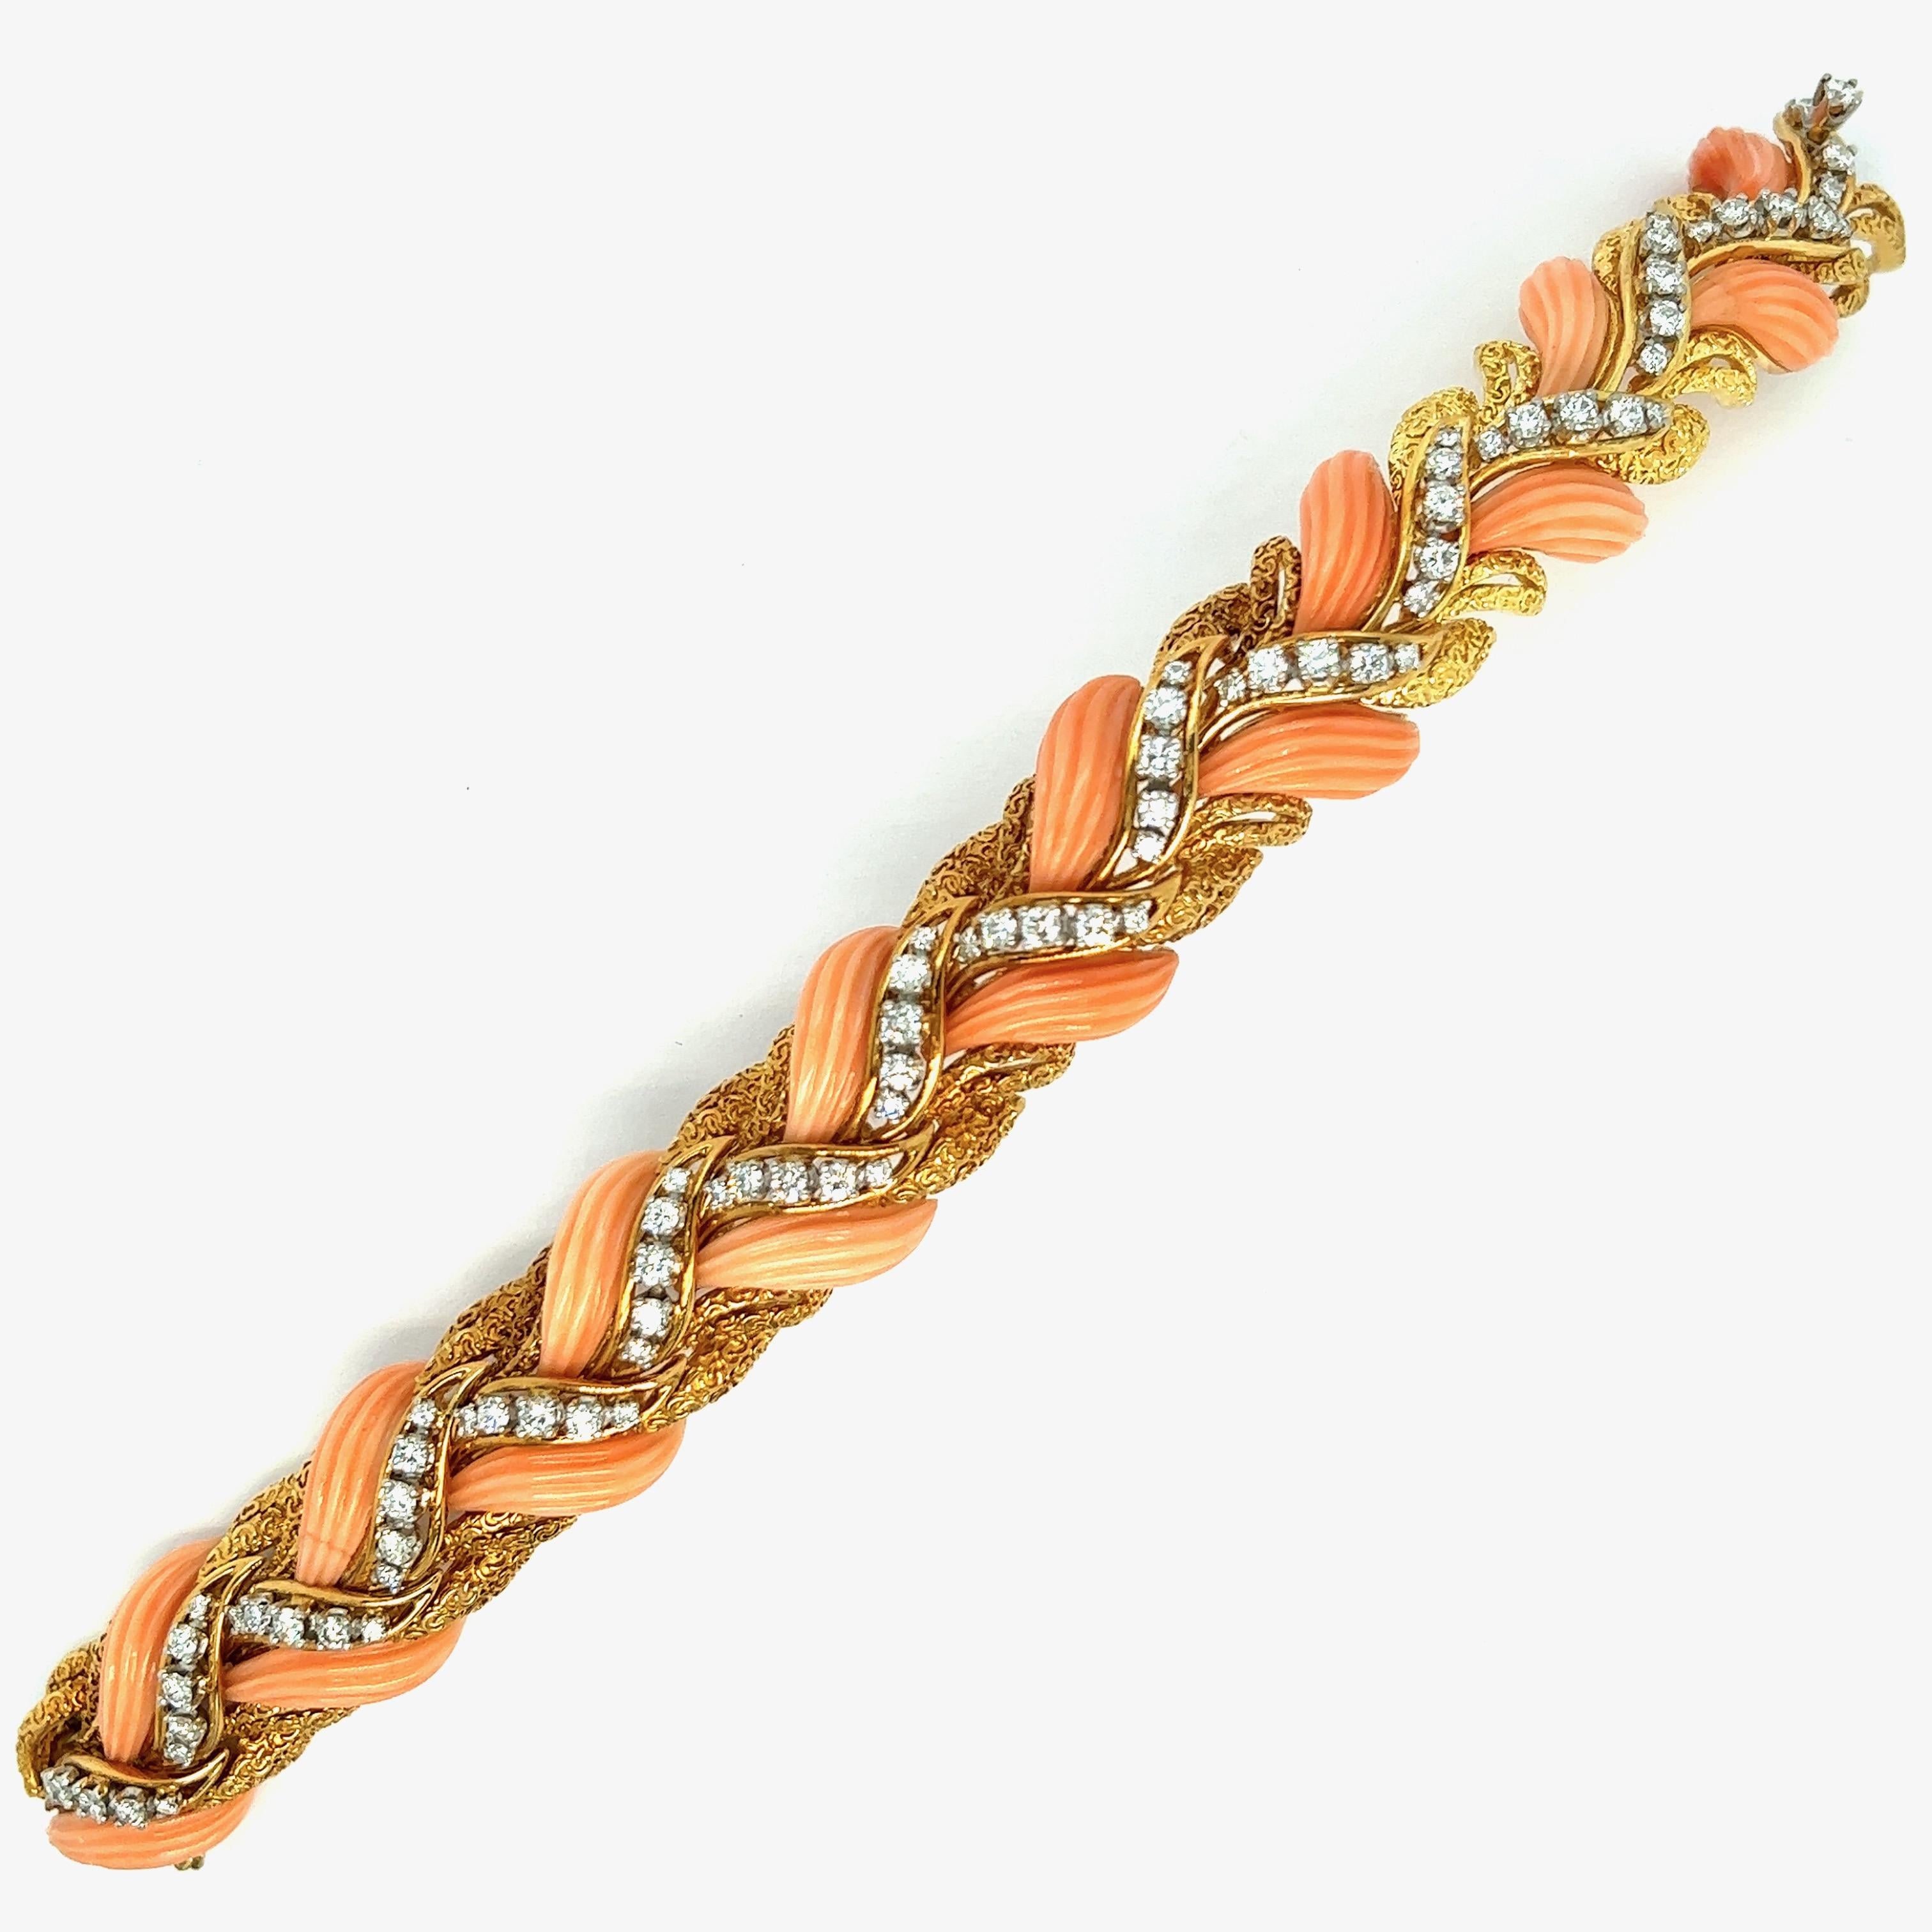 Van Cleef & Arpels angel skin coral diamond bracelet

Finely carved angle skin coral bracelet, with 80 round brilliant-cut diamonds (VS1-VS2, F-G), graduating in size, and weigh approximately 5 carats; marked VCA 

Size: width 0.75 inch, inner